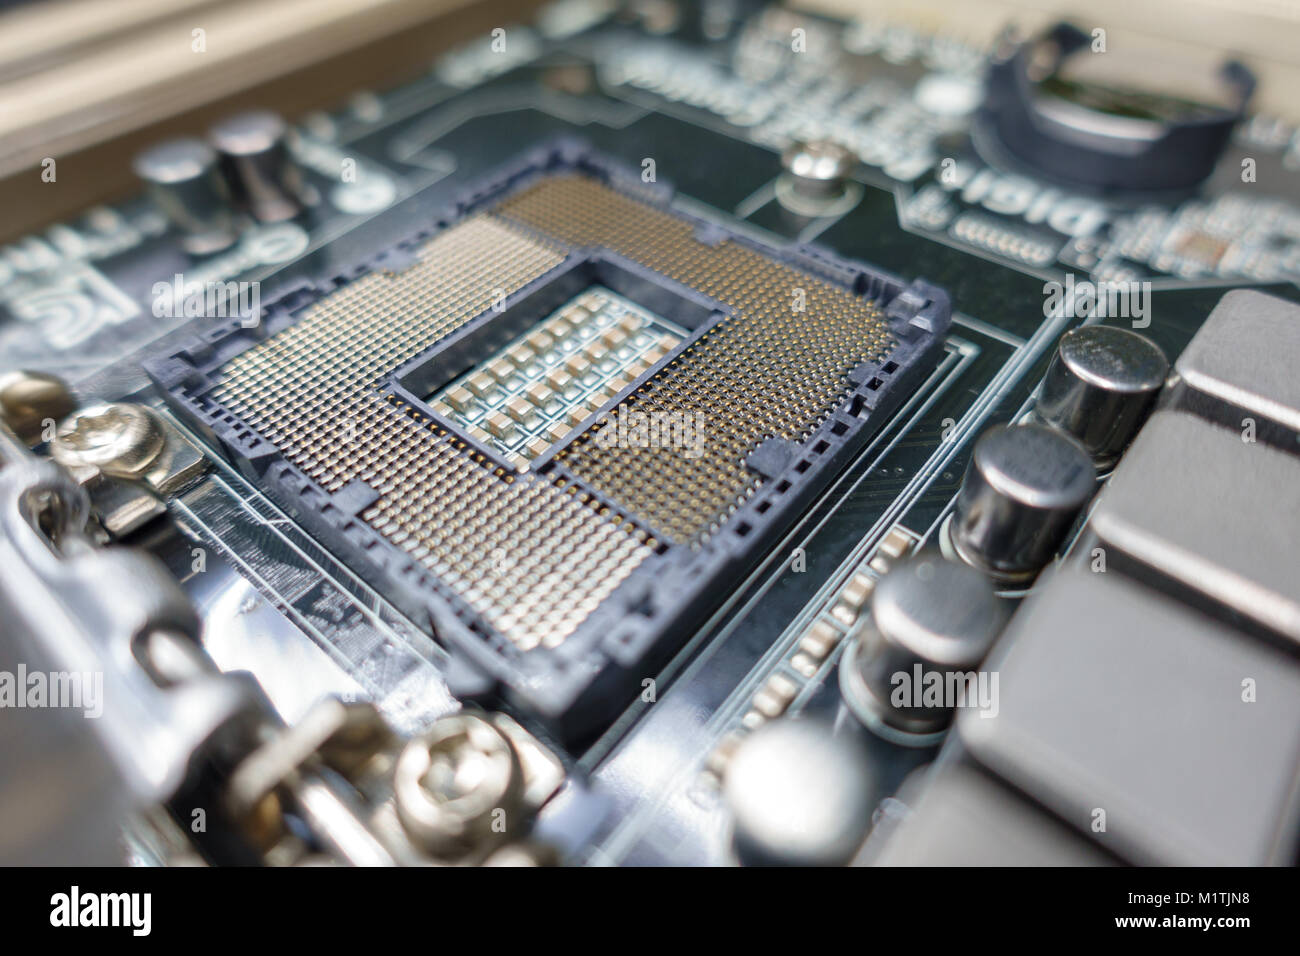 Processor slot and motherboard Stock Photo